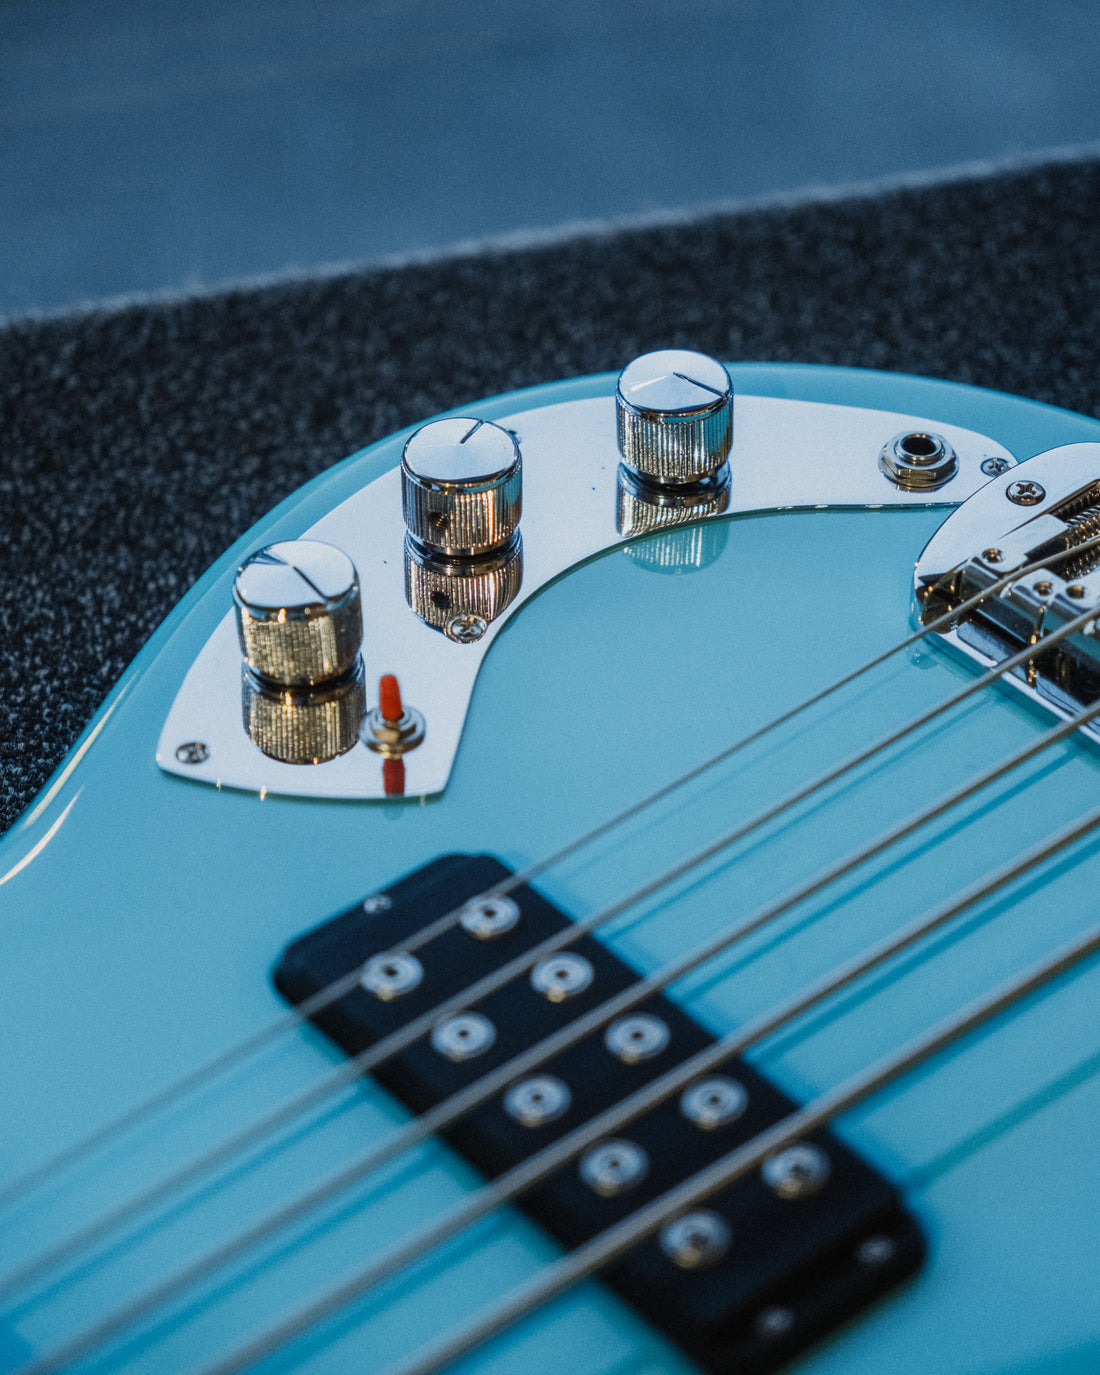 G&L CLF Research L-1000 Series 750, Turquoise